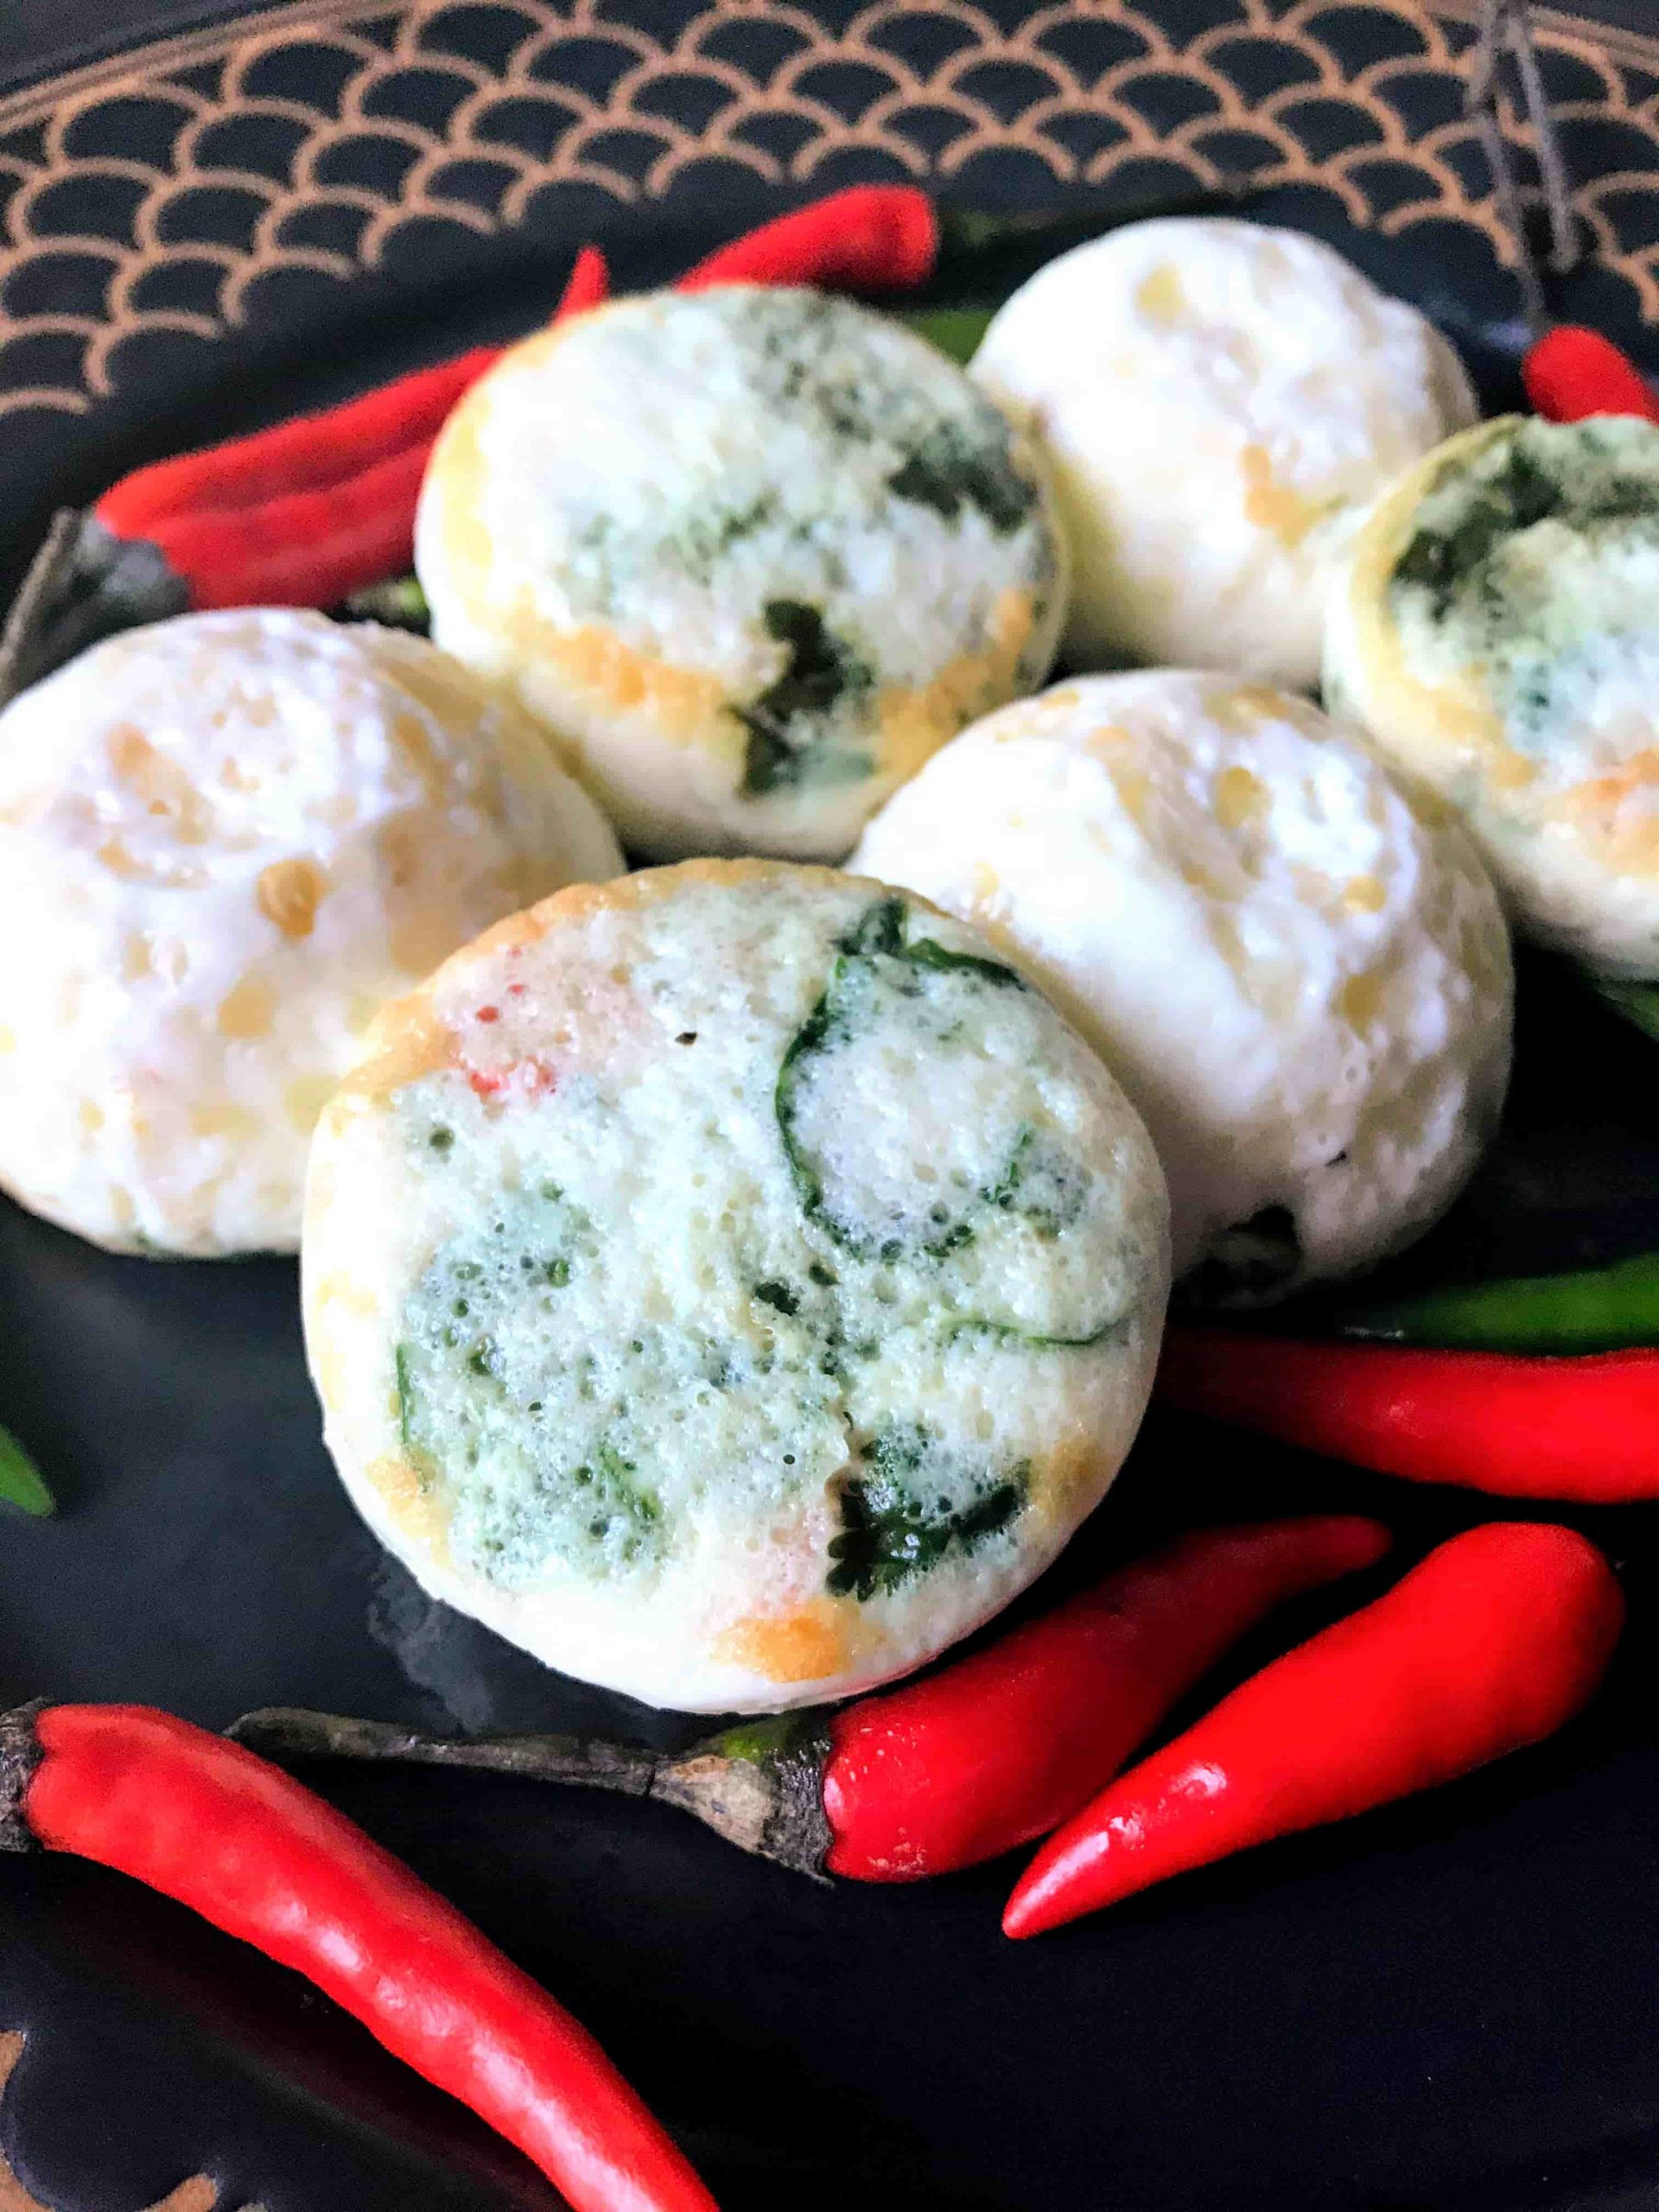 Sous Vide Egg Bites With Red Pepper